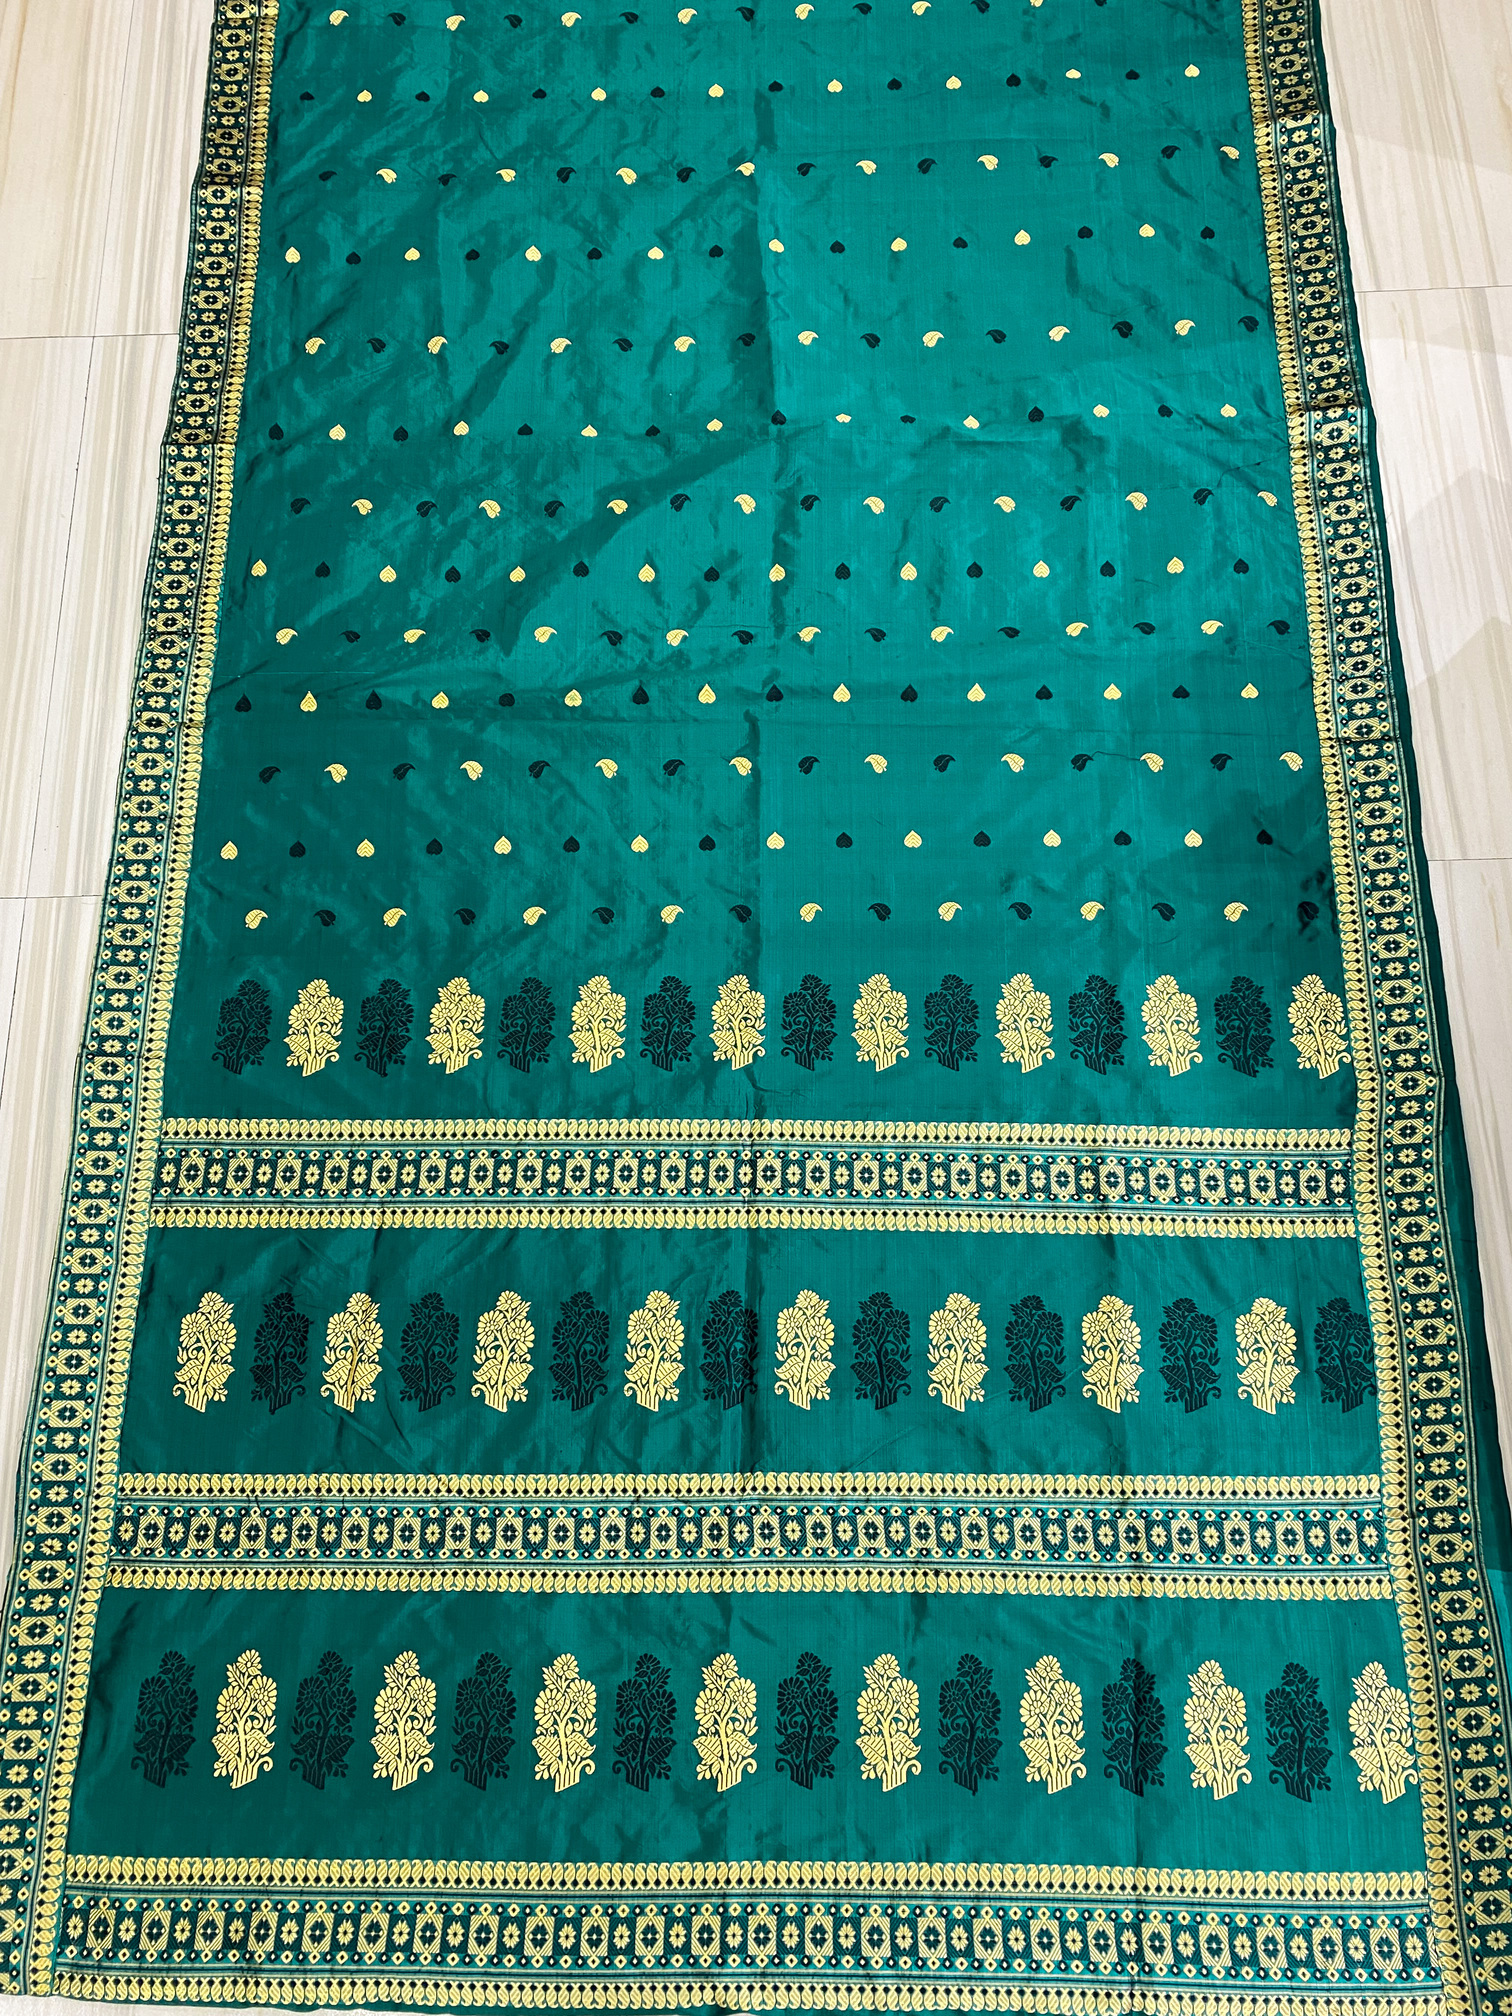 Bottle Green Pure Paat/Mulberry Assam Silk Saree with Multicolour Motifs-MS188